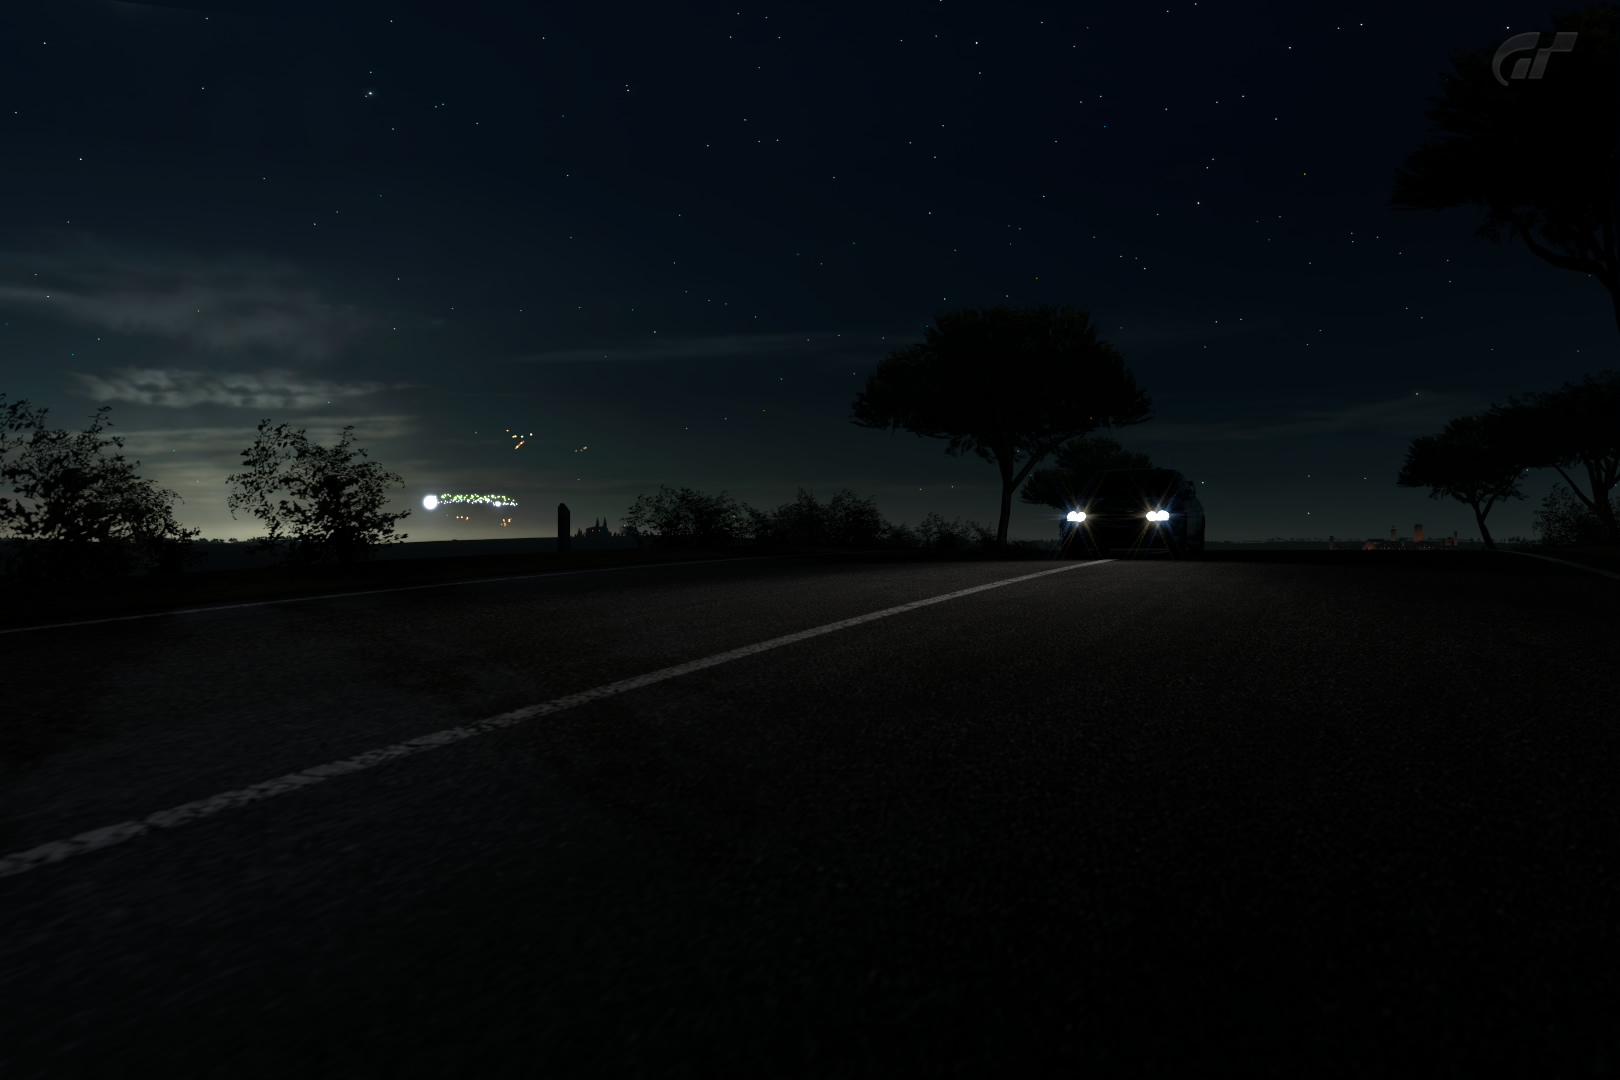 the car is traveling in the dark road at night